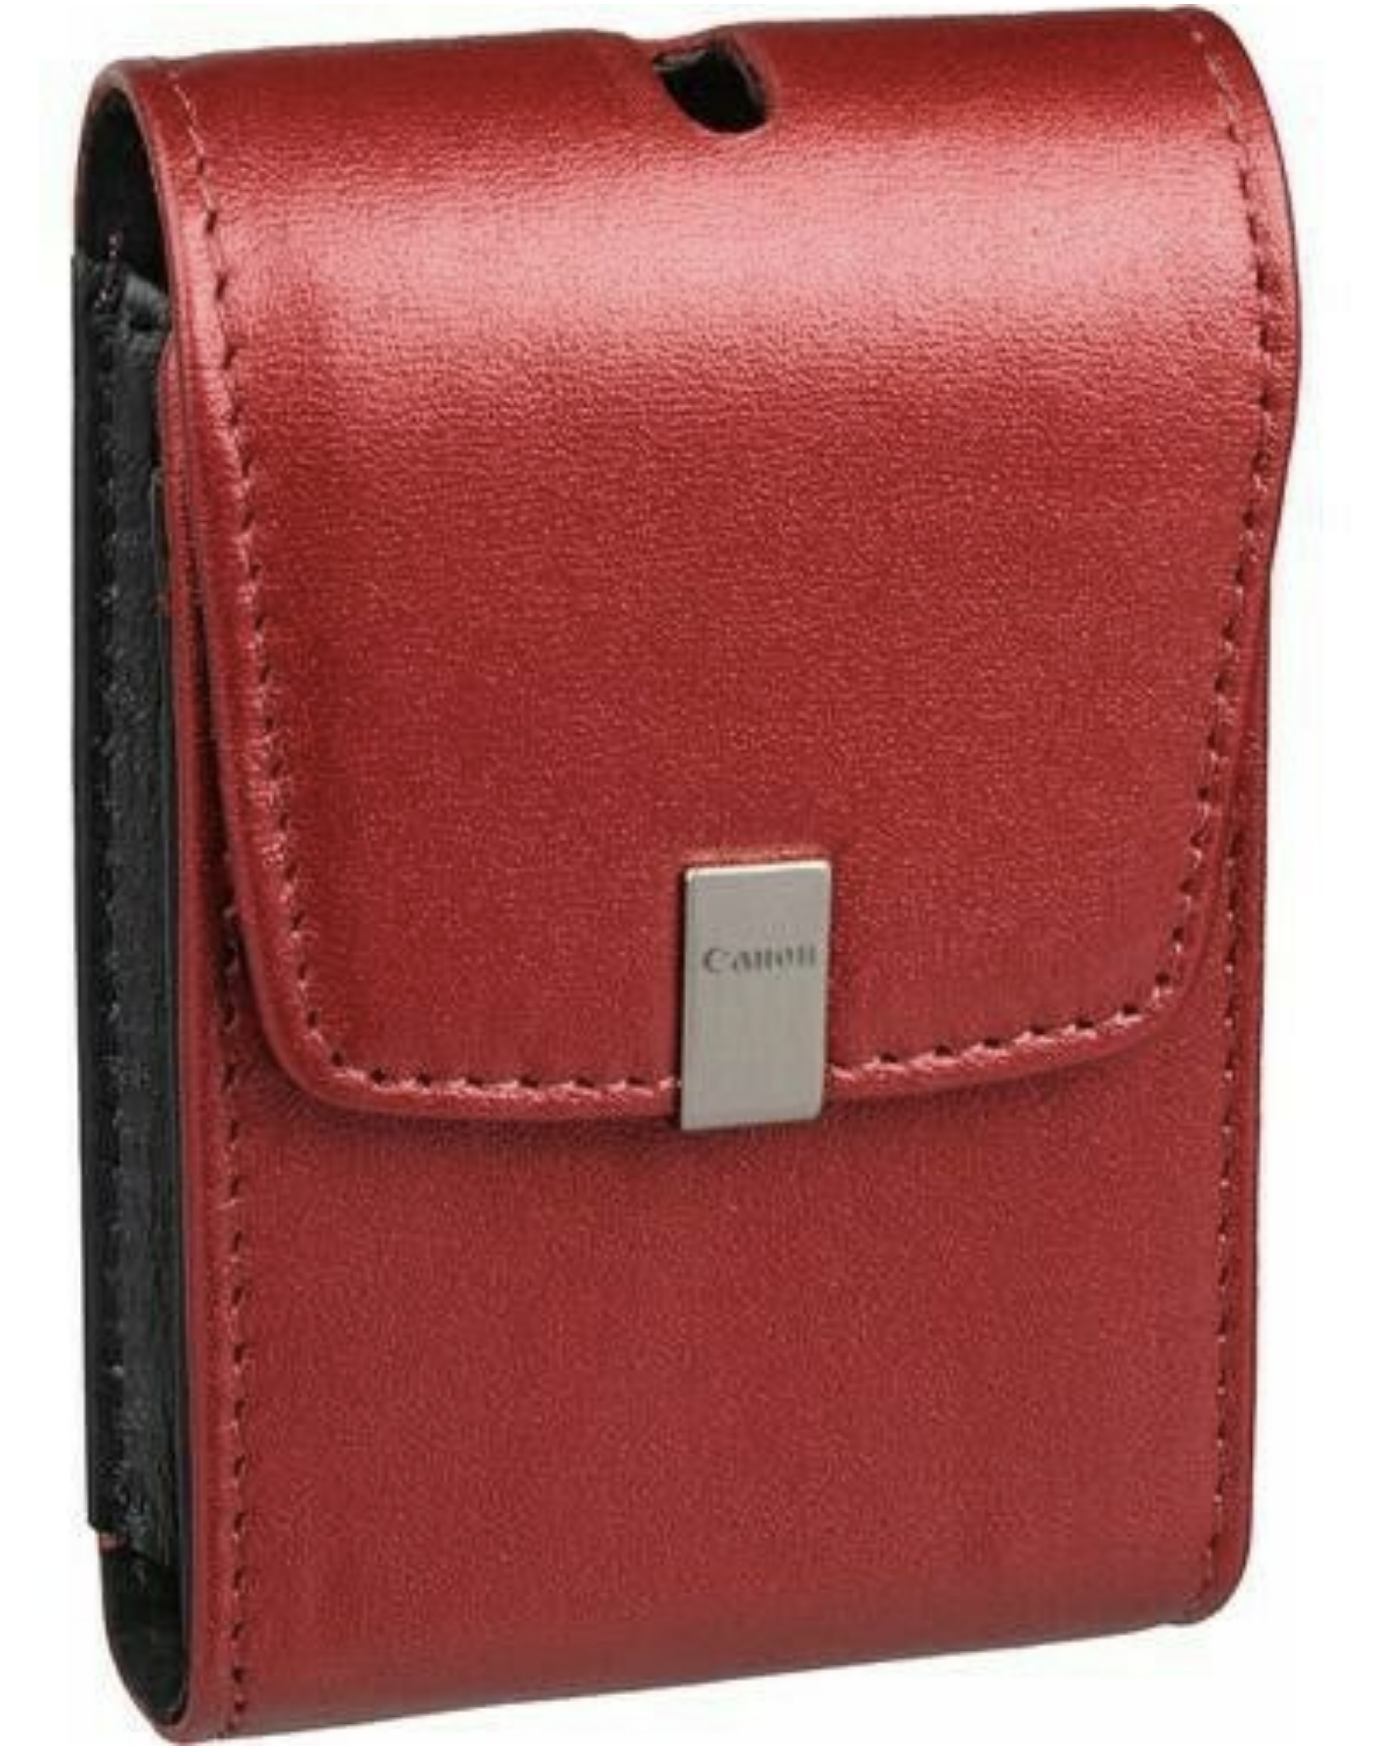 Canon PSC-1050 Deluxe Leather Case - Red